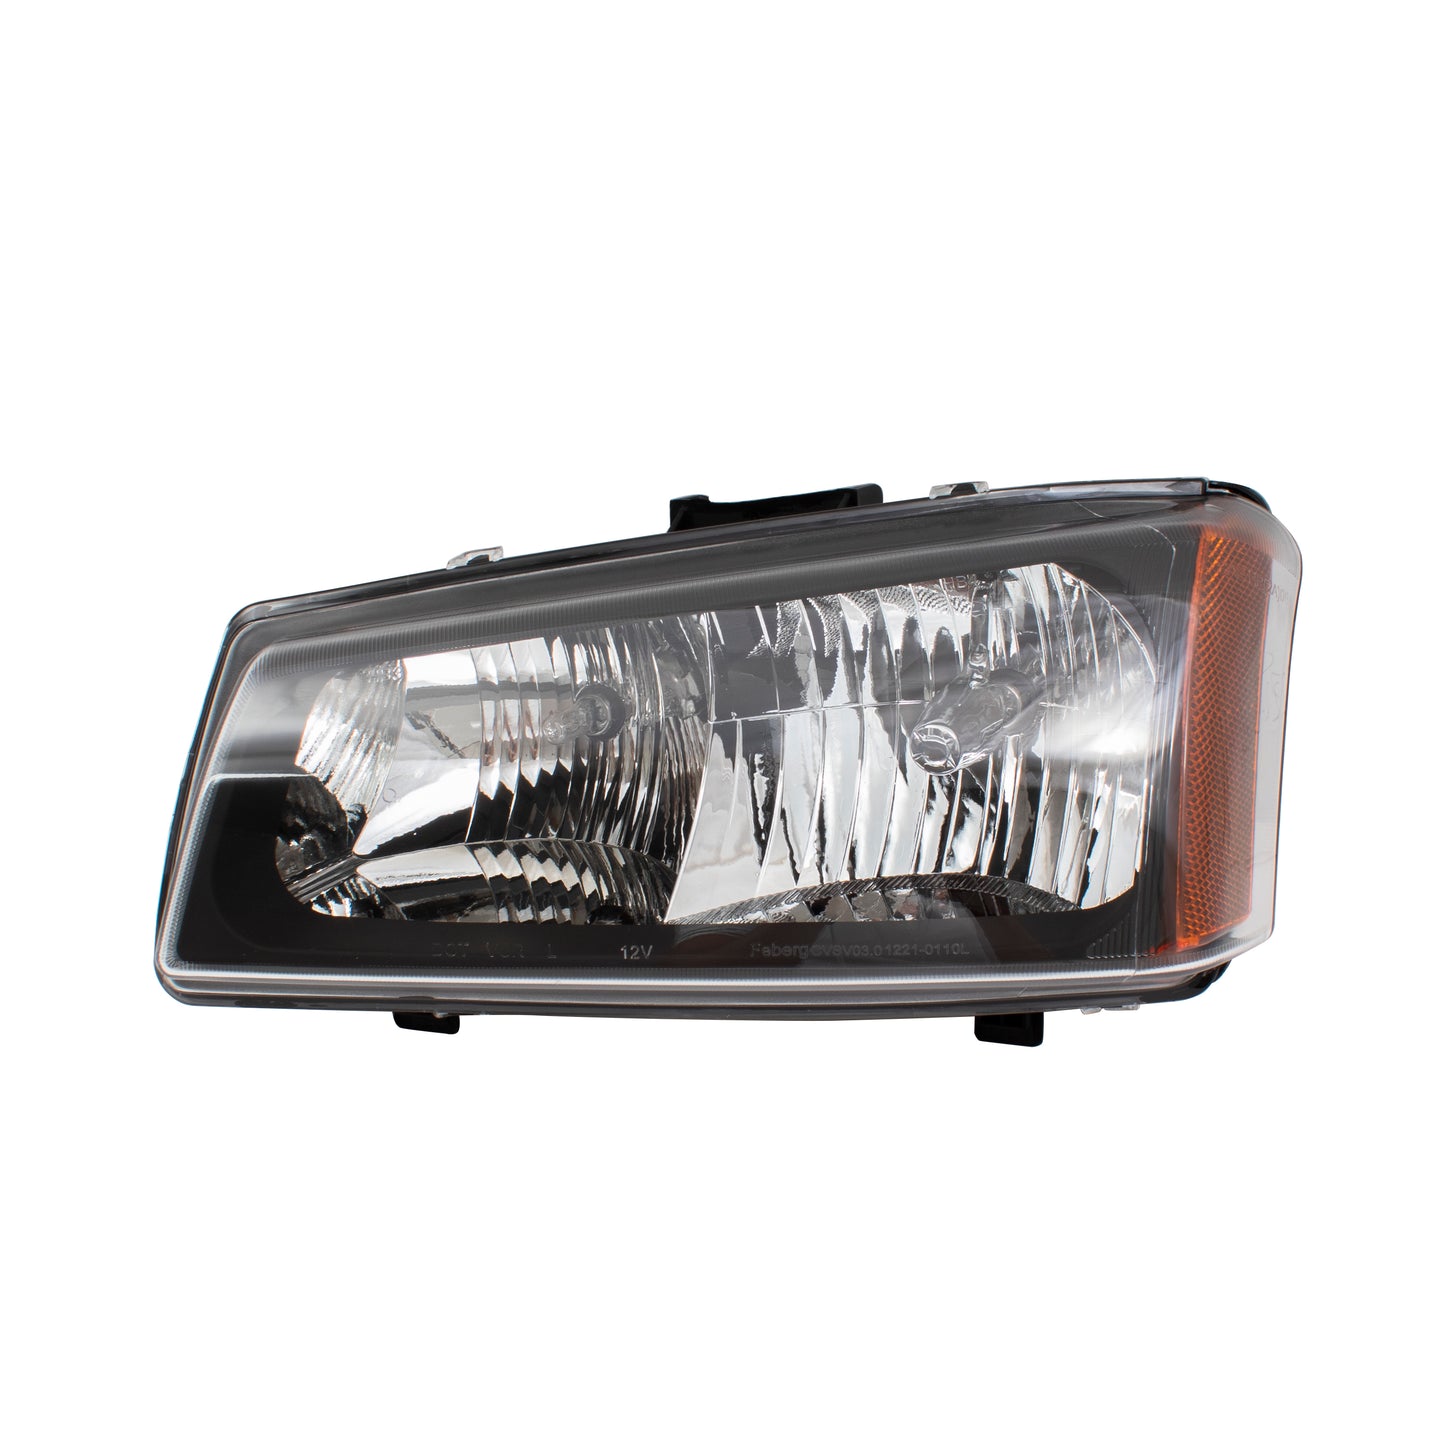 Brock Replacement Drivers Halogen Headlight Compatible with 03-06 Avalanche Silverado 07 Classic